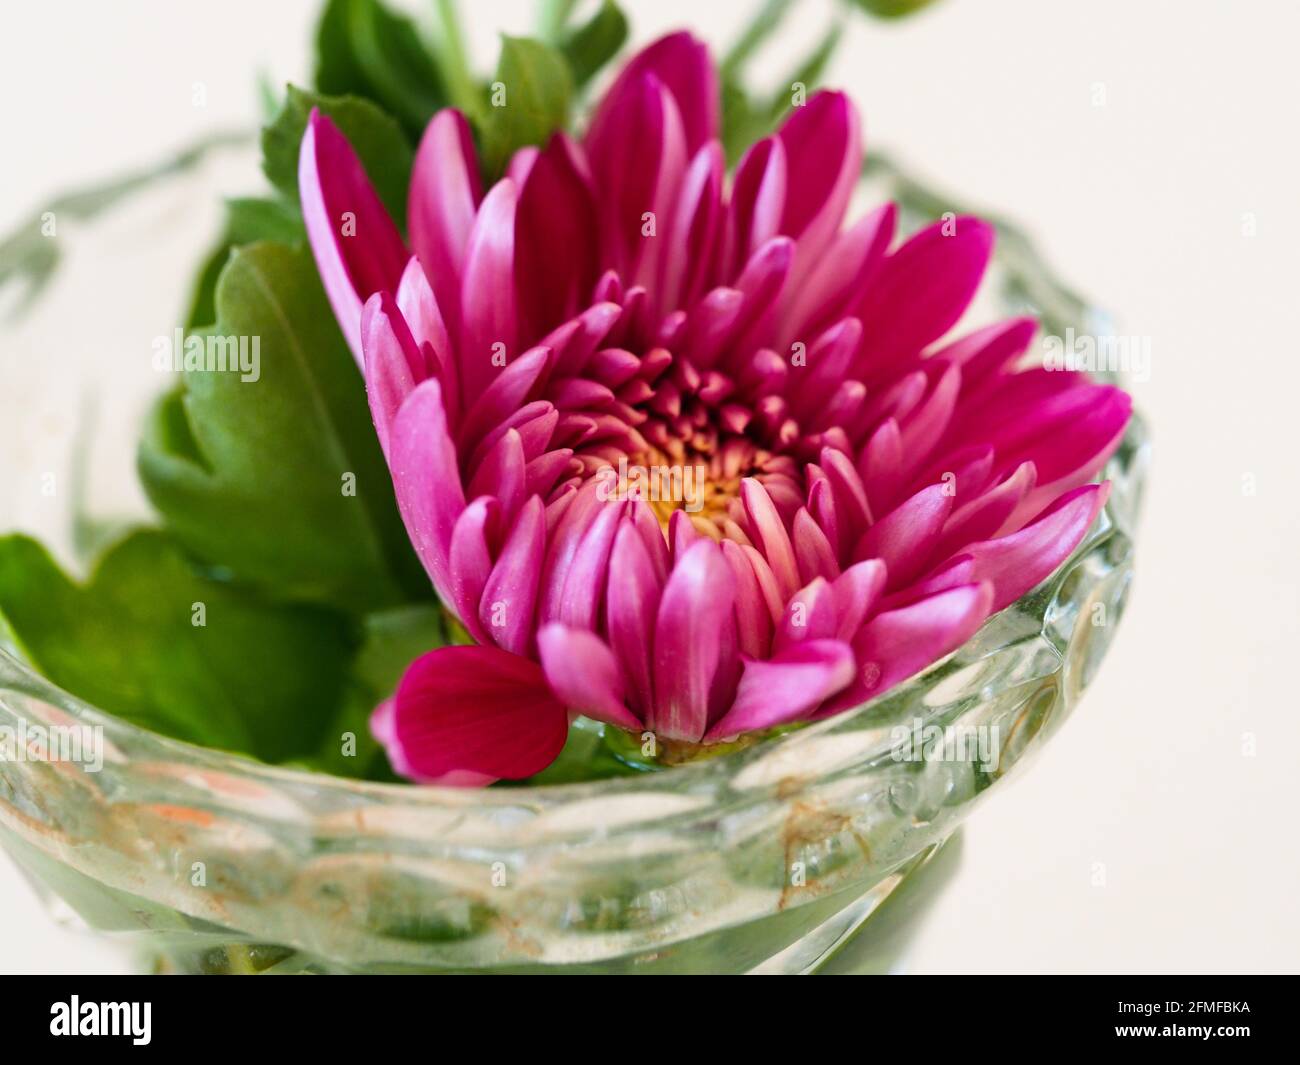 Flowers in a vase, Macro of a Magenta pink Chrysanthemum, Mother’s Day flower opening in a crystal vase Stock Photo